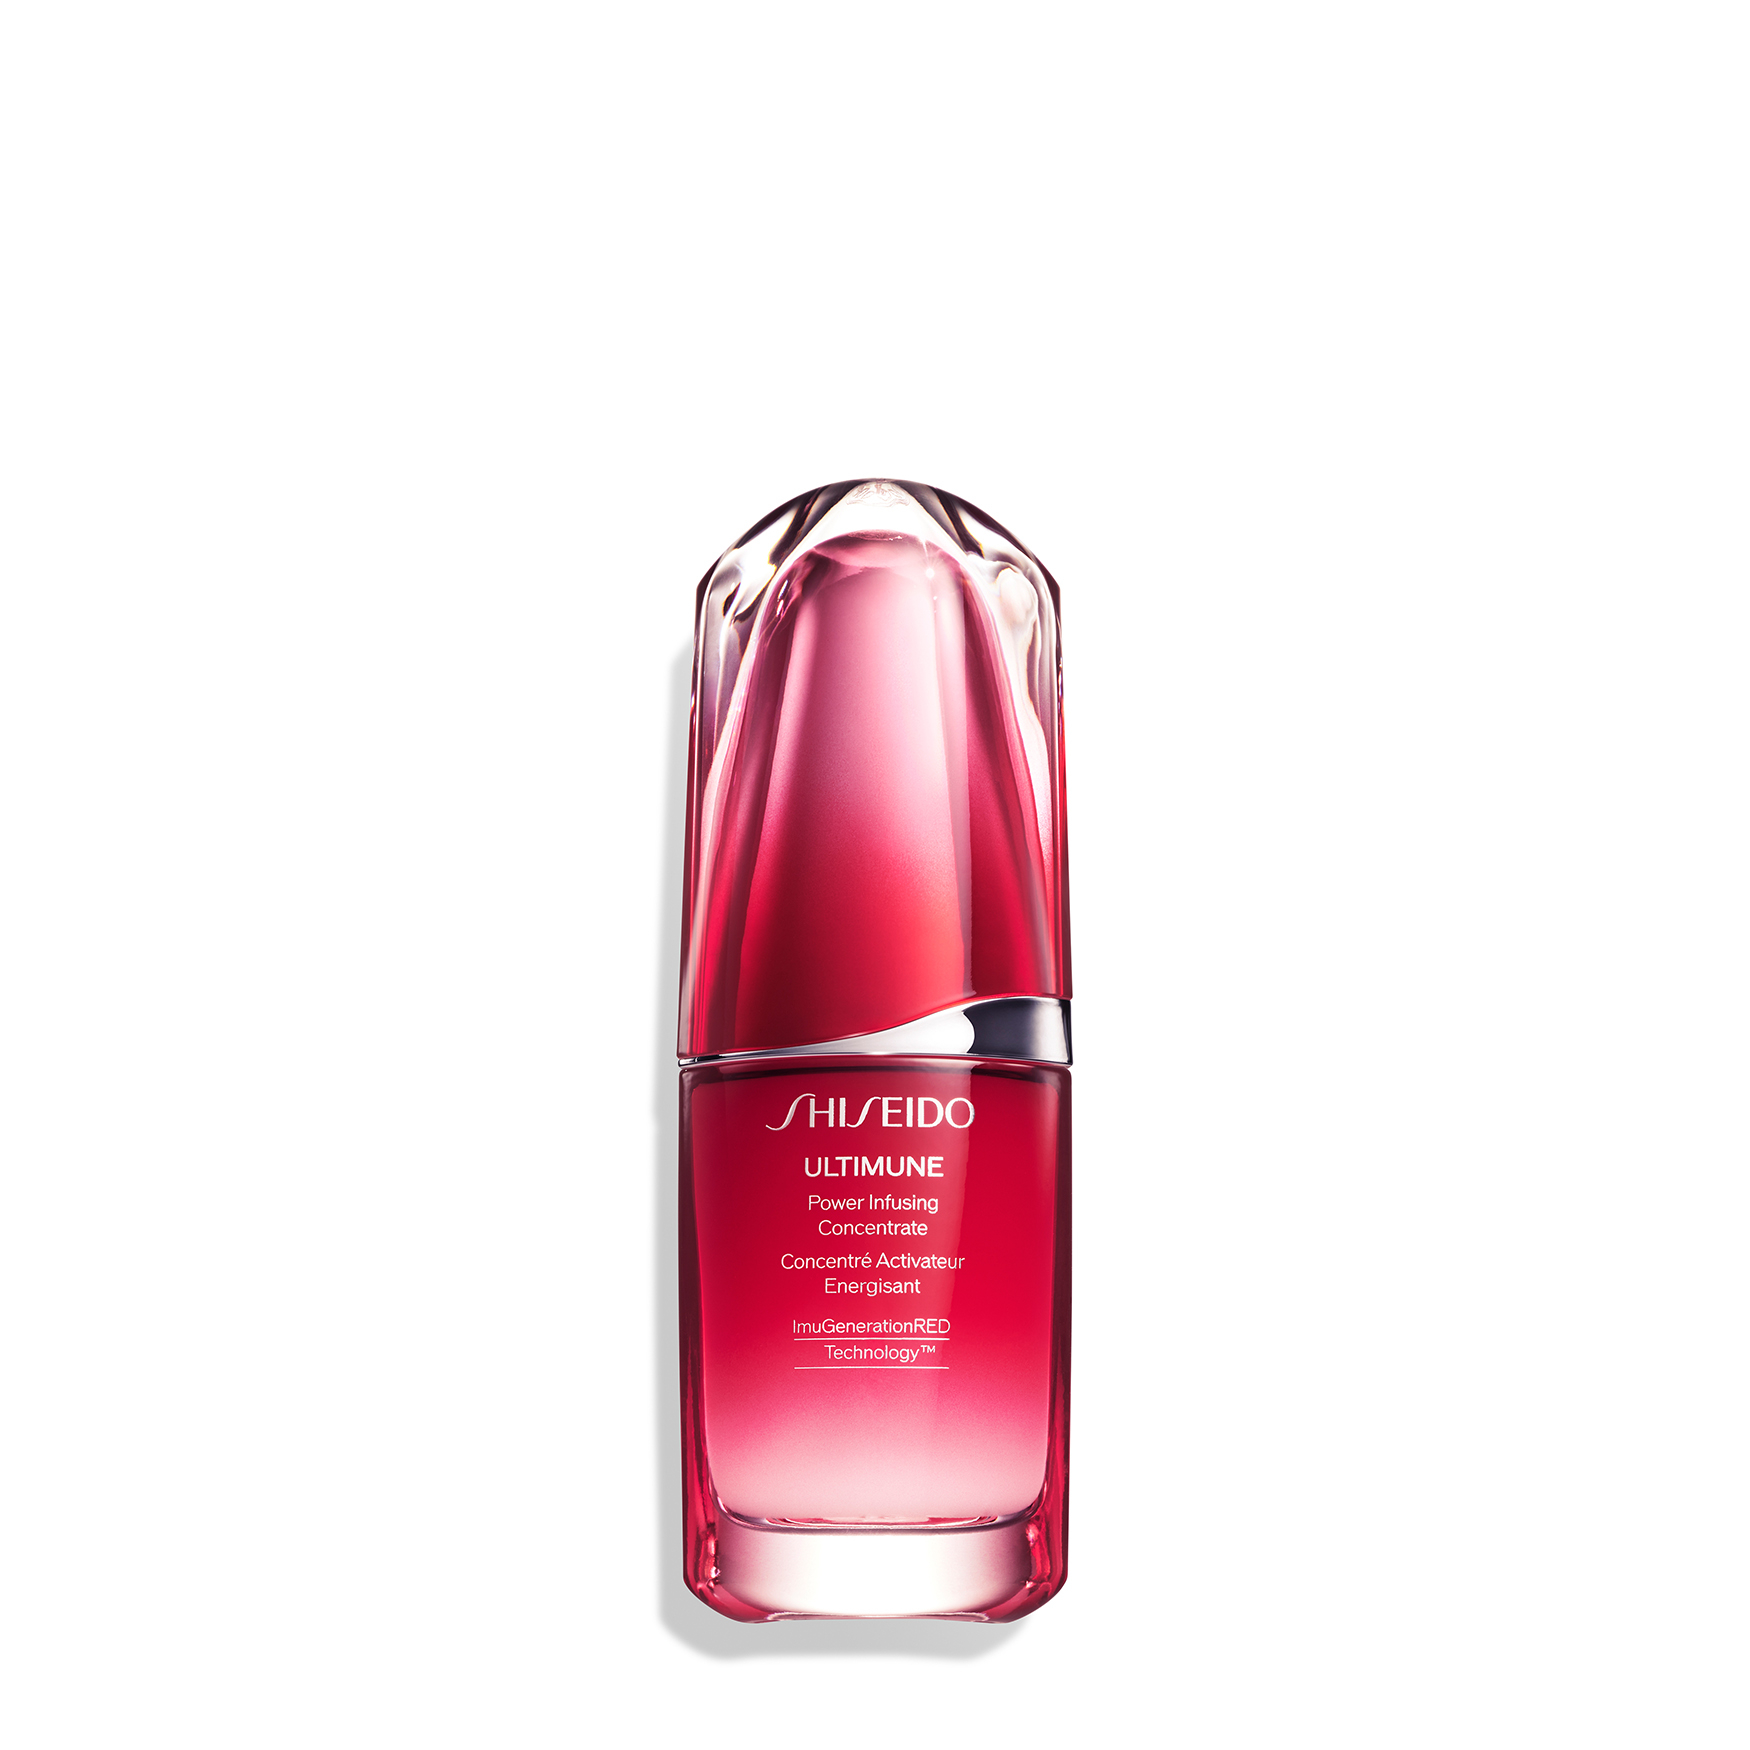 Shiseido Ultimune Power Infusing Concentrate | Space NK